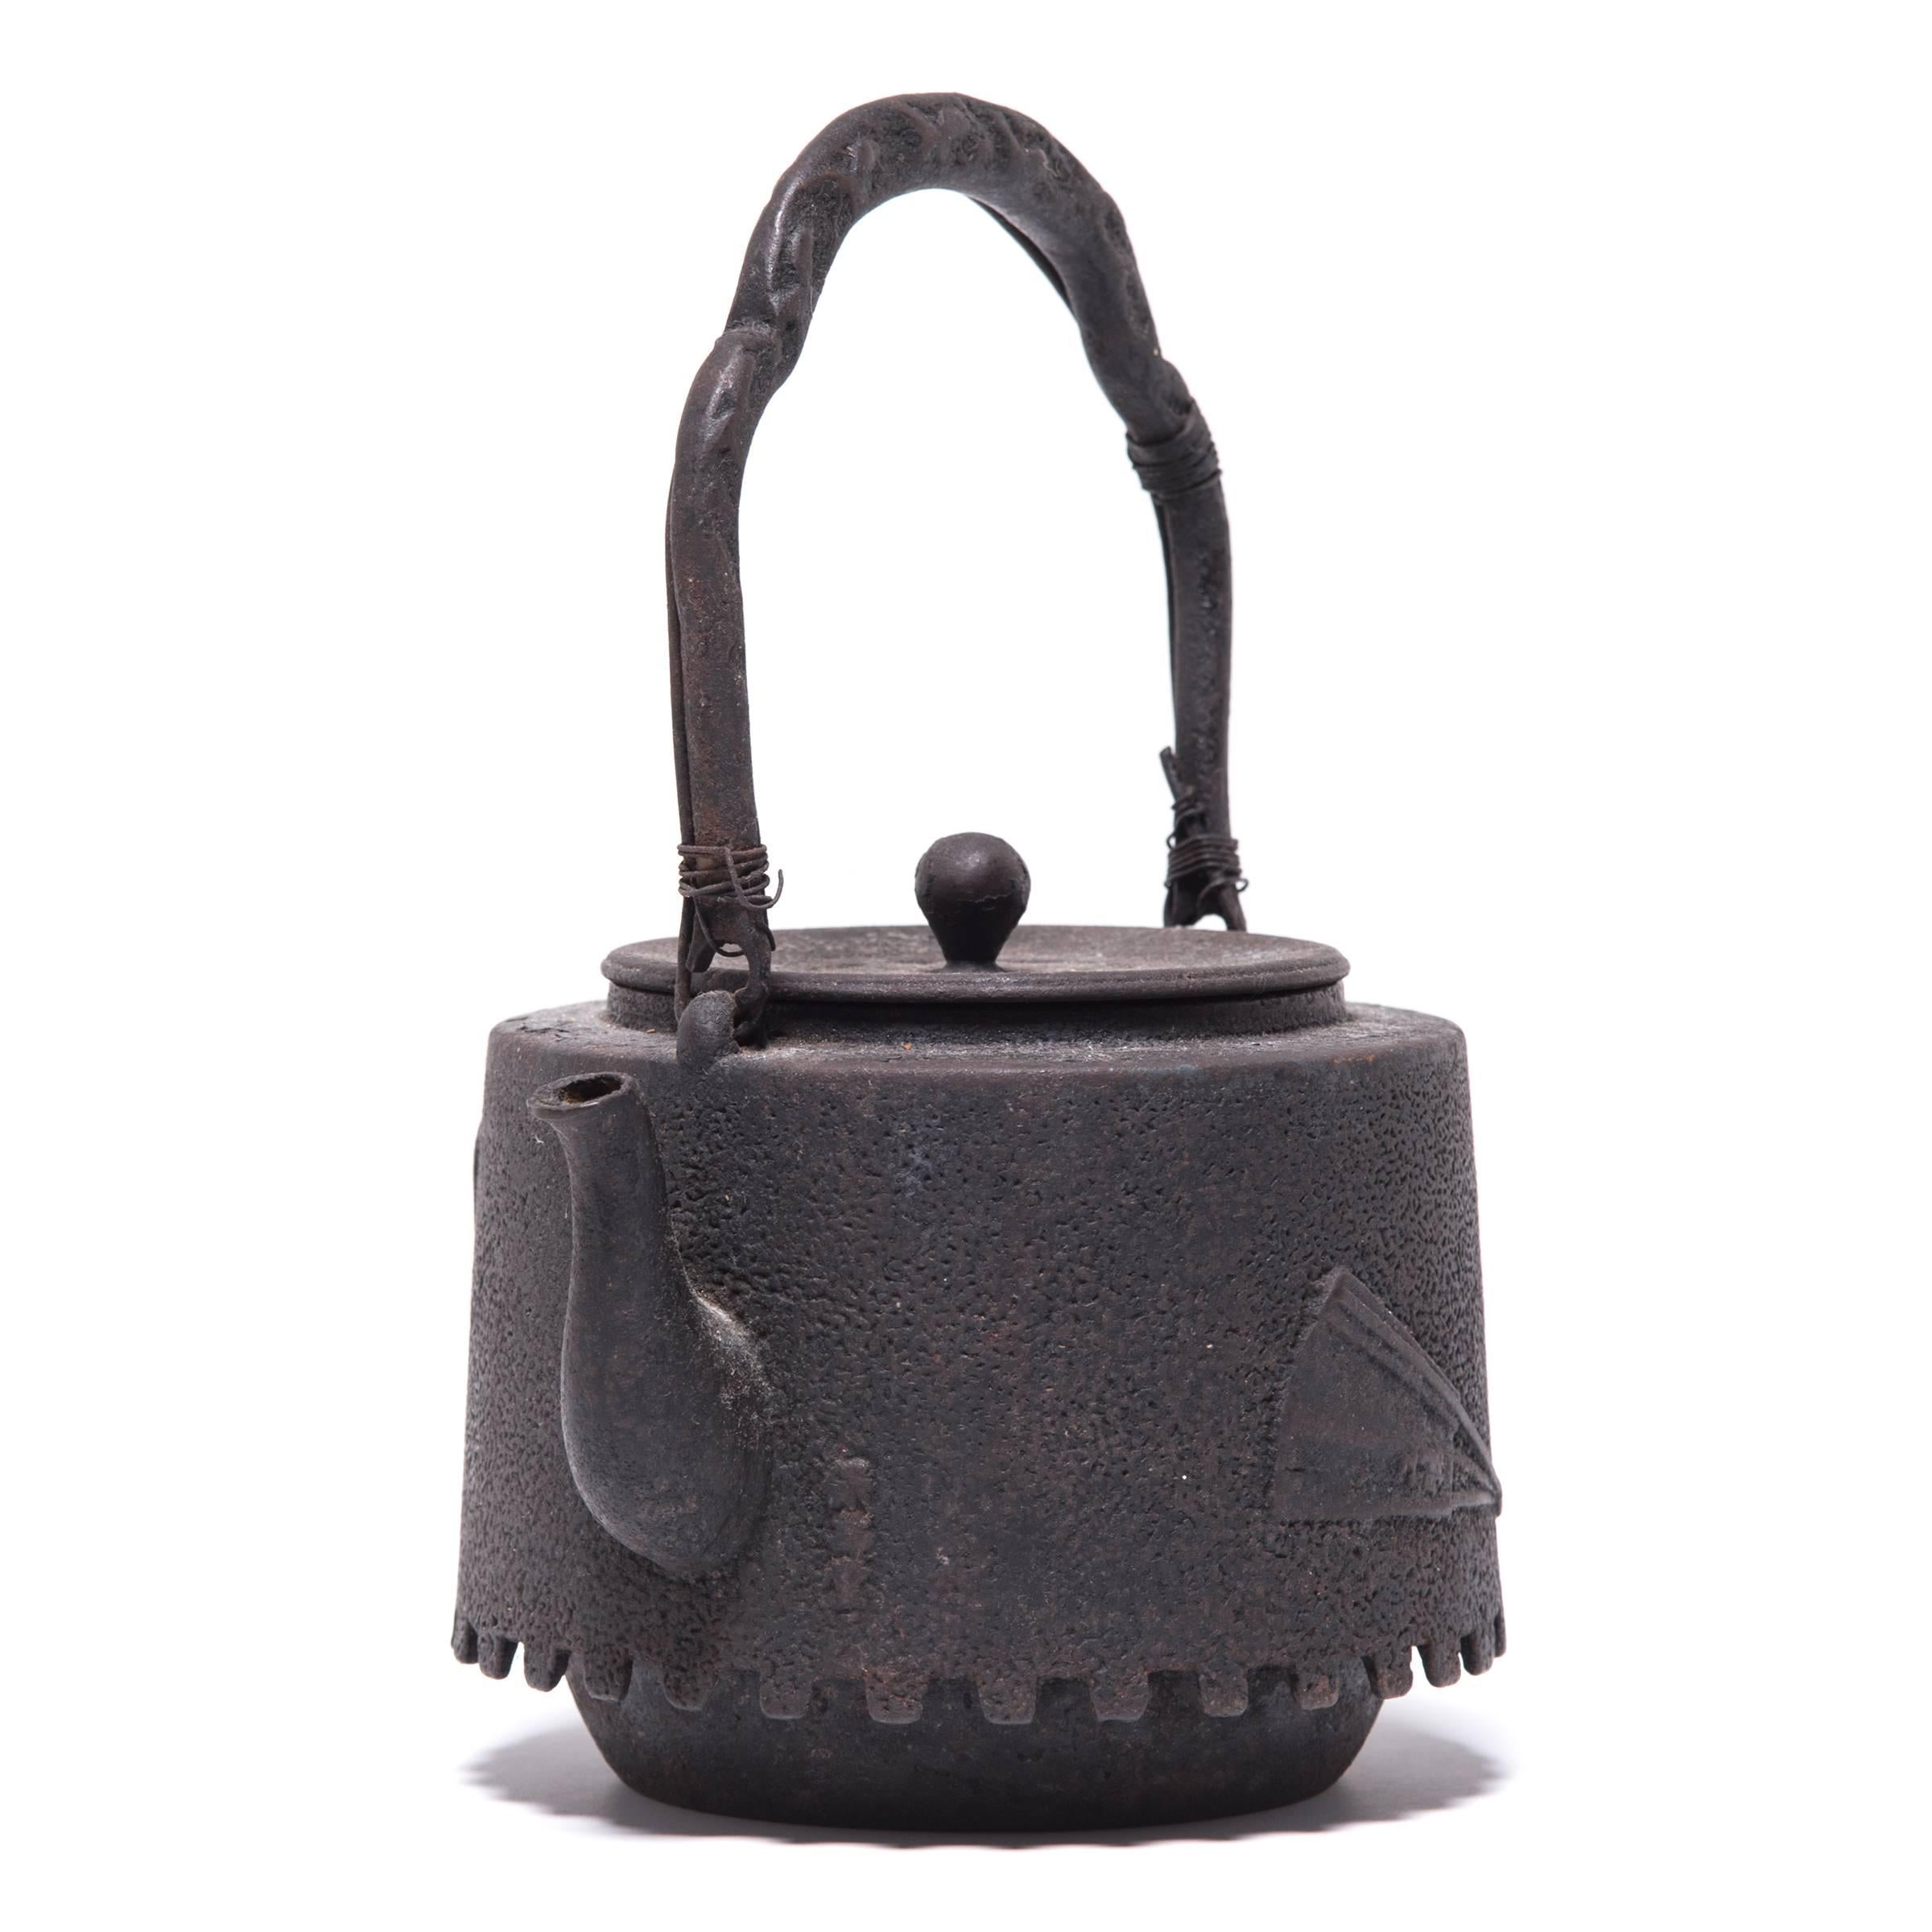 Decorated with a raised fan motif, this aptly named teapot was used to boil water for traditional tea ceremonies. The kettle’s cast-iron construction is said to change the quality of the water, making tea taste mellow and sweet. Made by pouring iron